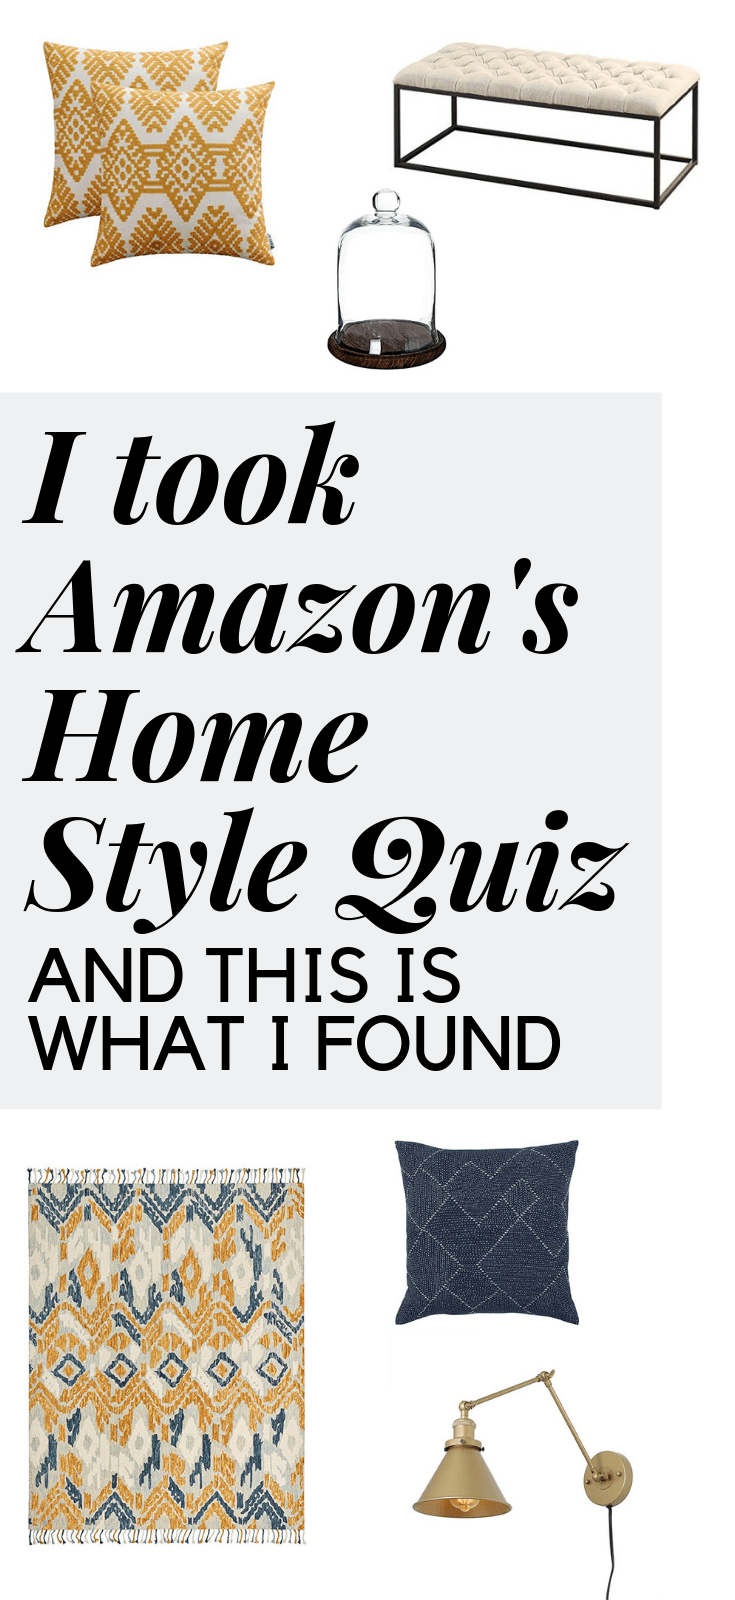 I took Amazon's Home Style Quiz - and this is what I found